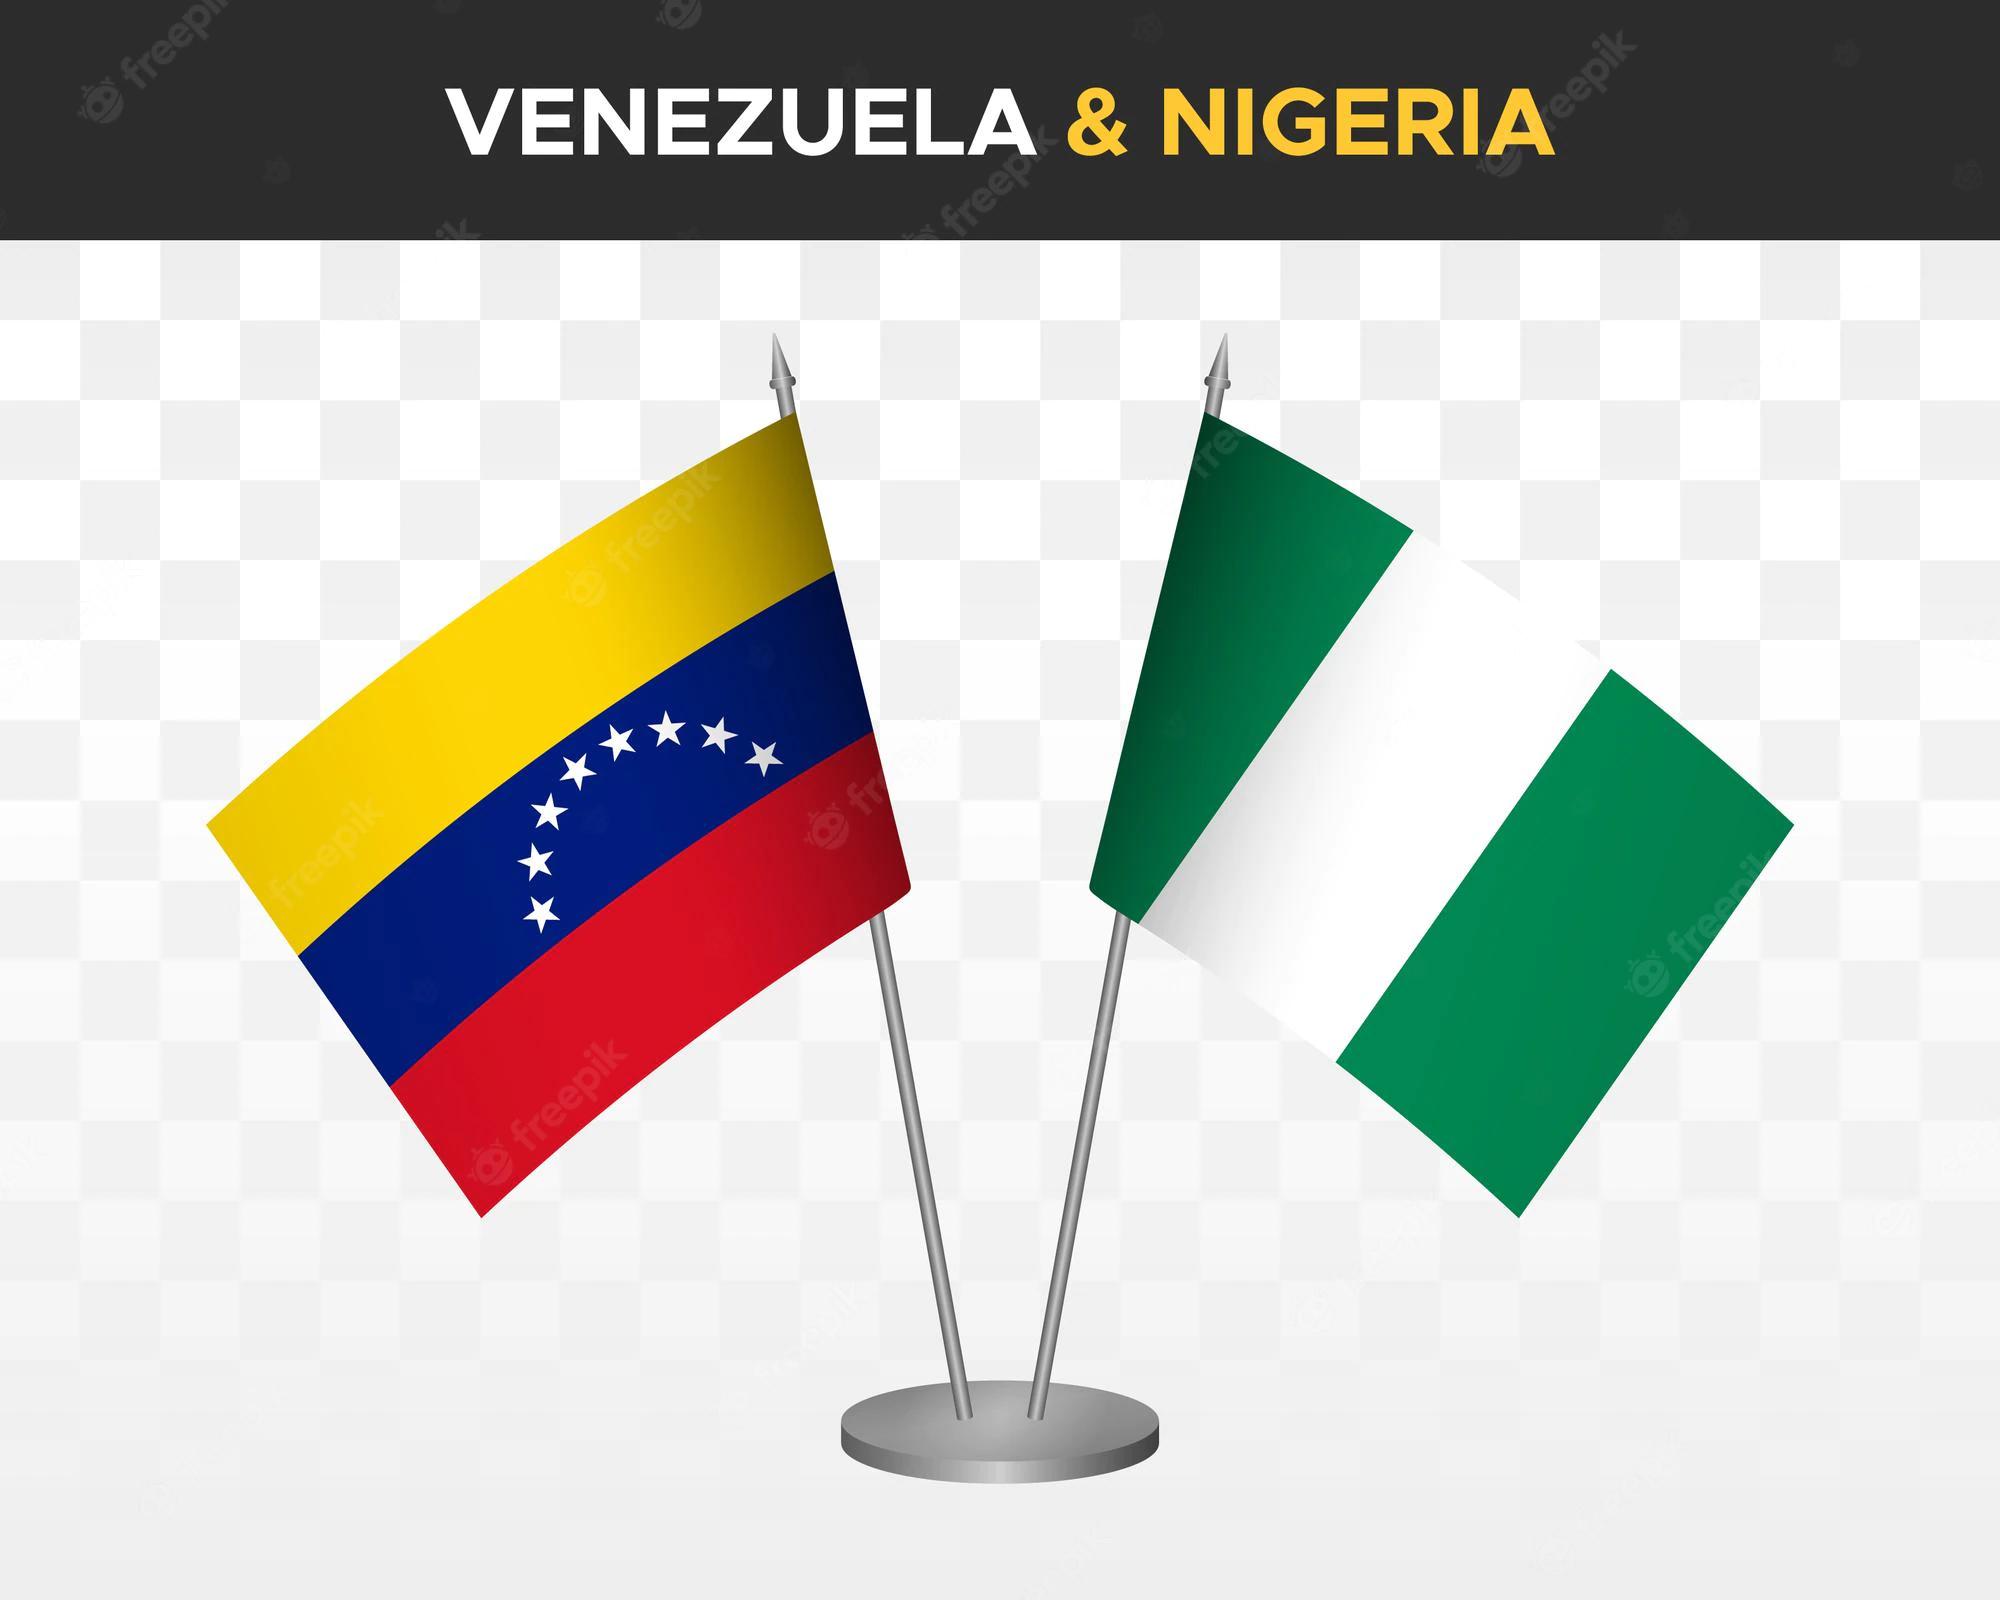 Nigeria, Venezuela sign MoU on protection, promotion of human rights